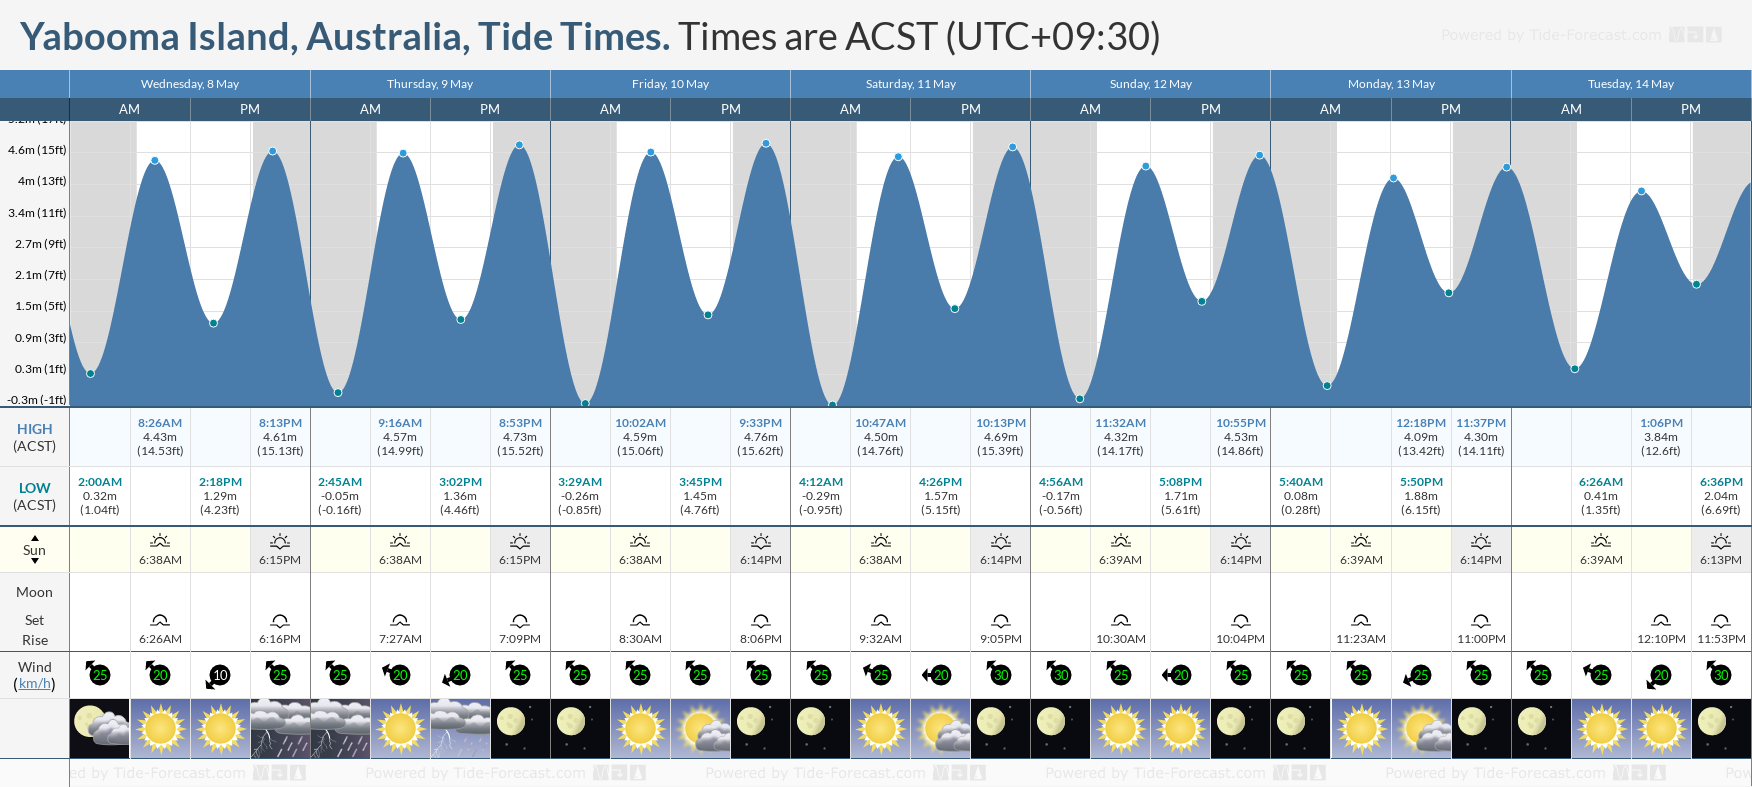 Yabooma Island, Australia Tide Chart including high and low tide tide times for the next 7 days